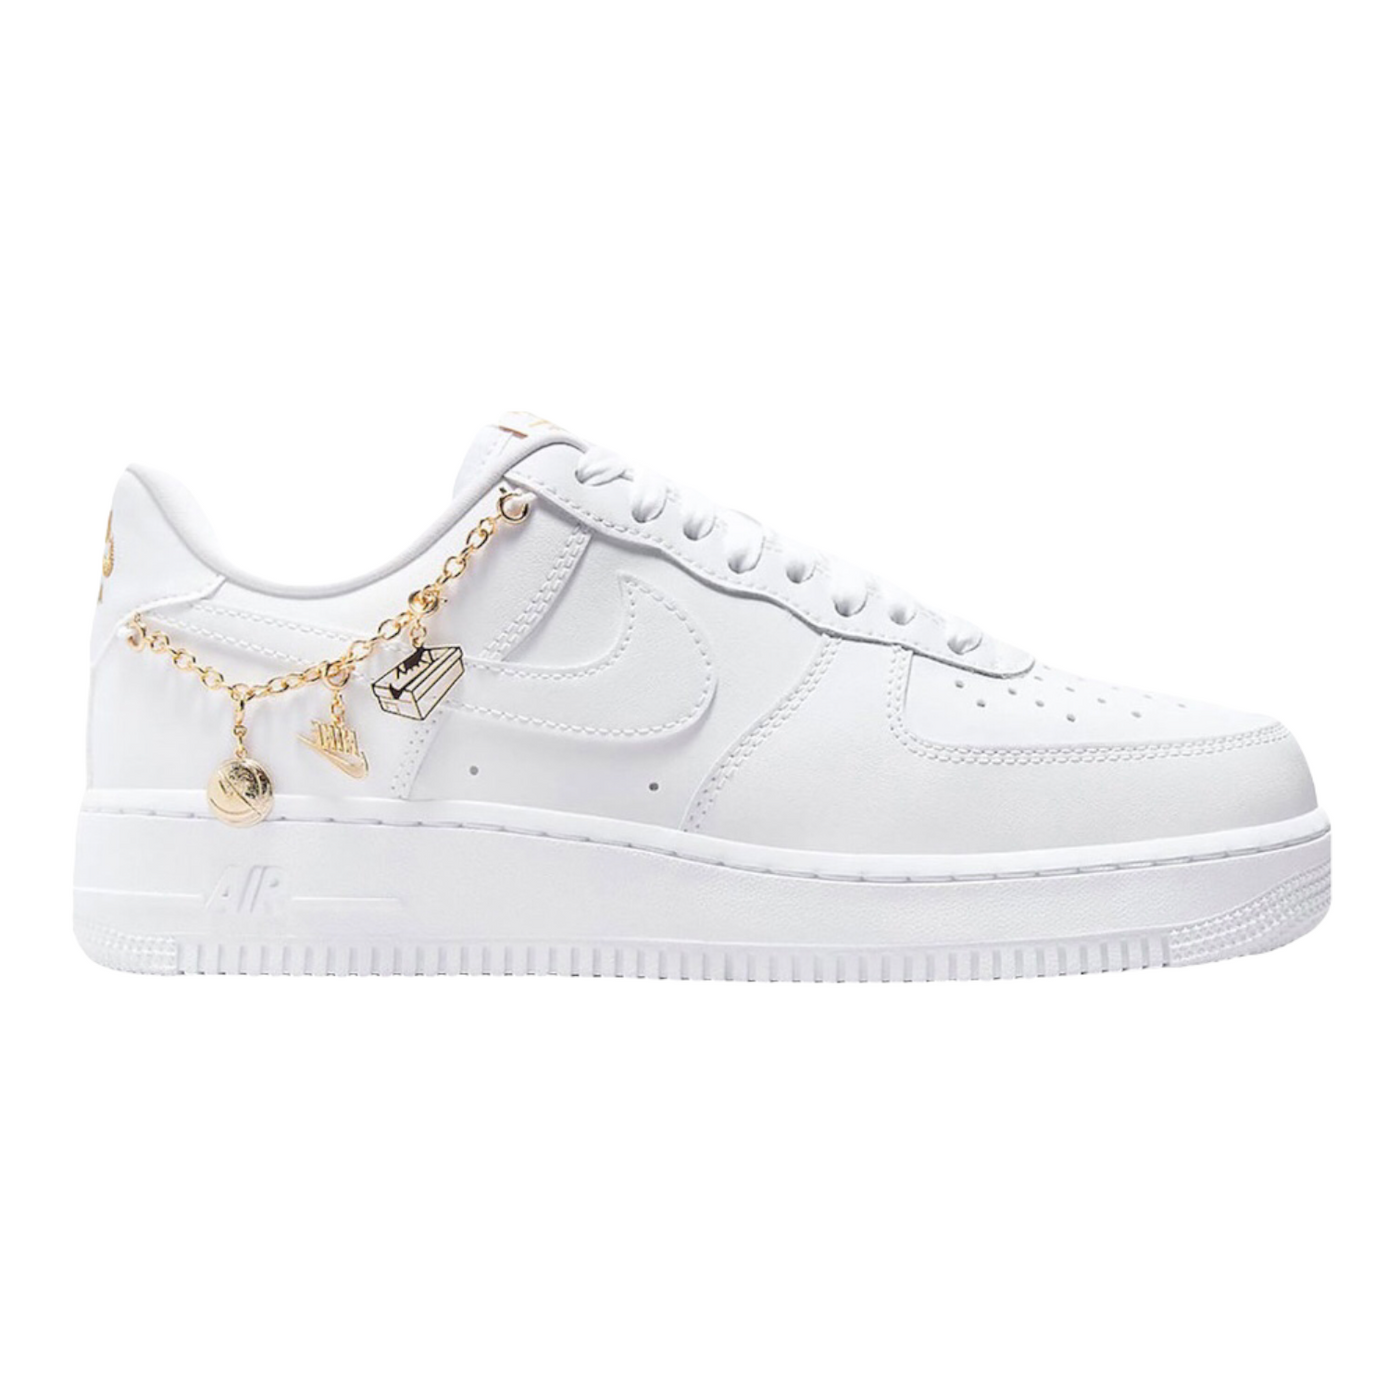 NIKE AIR FORCE 1 LX LUCKY CHARMS WHITE (W)